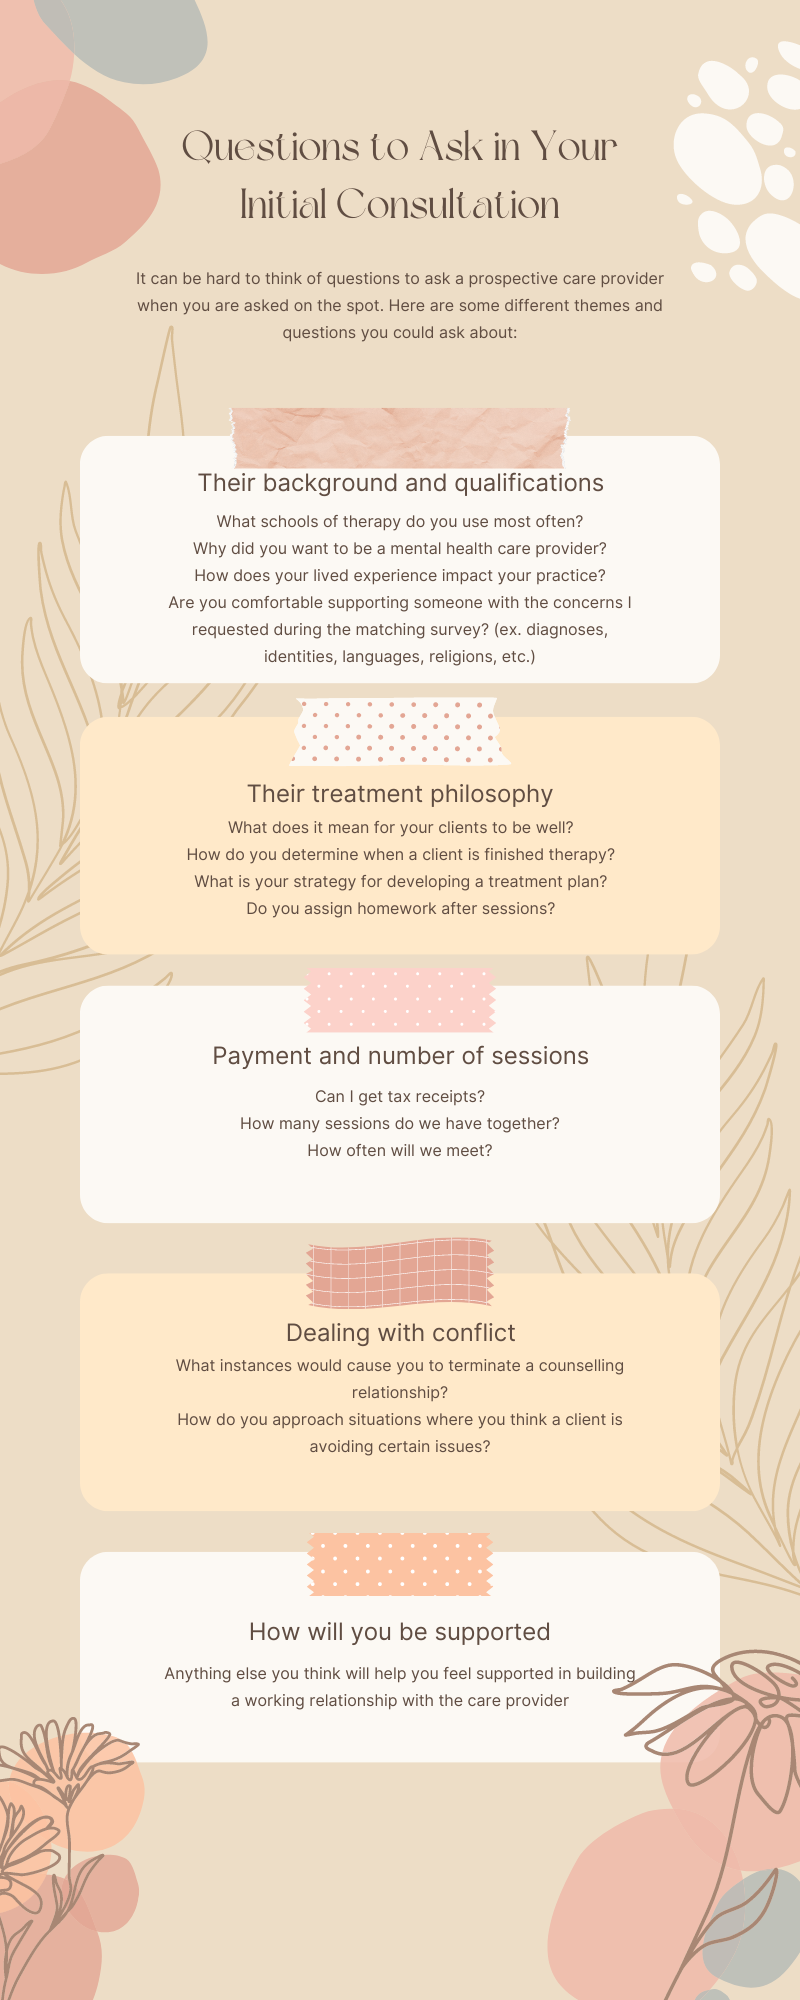 An infographic that displays a list of questions to ask during your initial consultation. These questions are also listed in the table later in this topic.